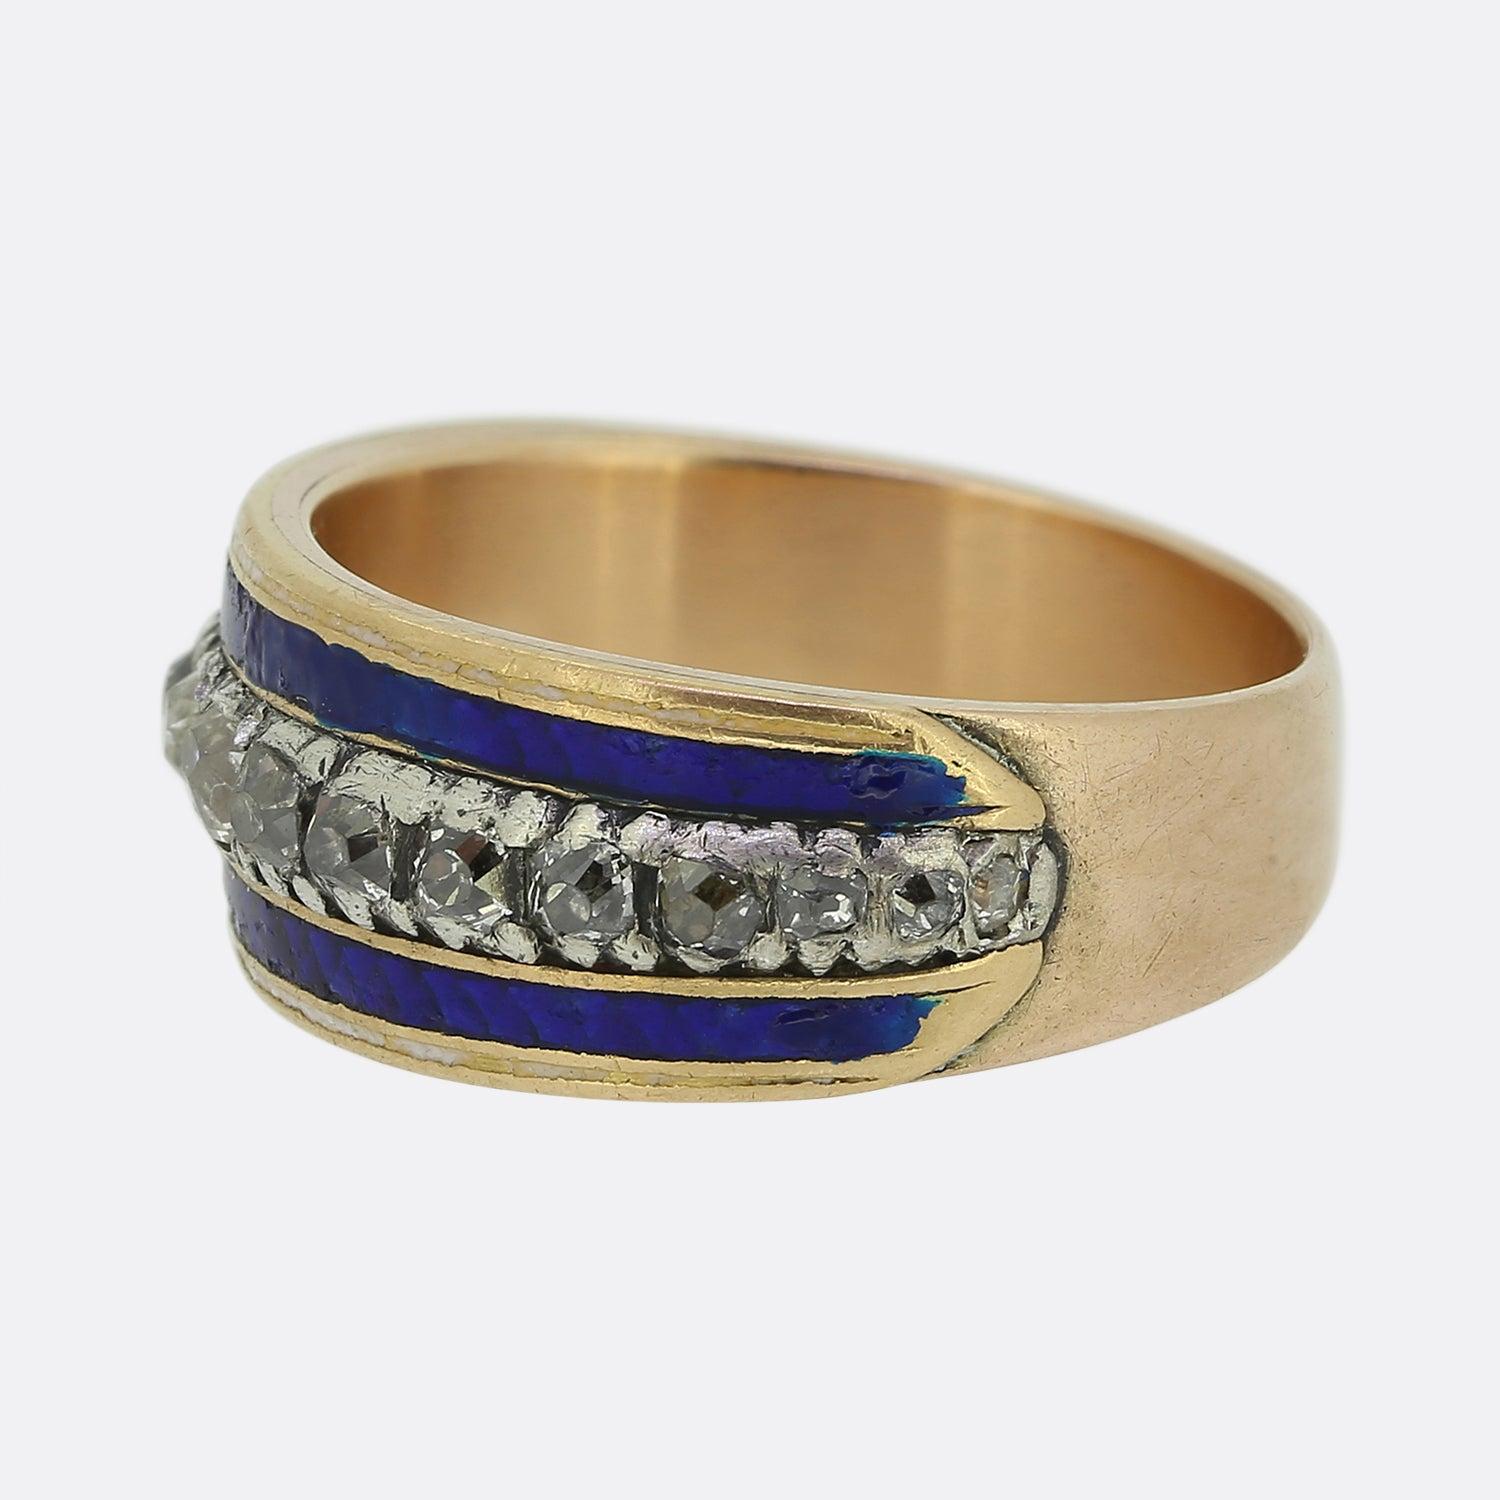 Here we have a charming antique enamel and diamond band ring. The piece has been crafted from 15ct rose gold and showcases a single line formation of graduating chunky table and old cut diamonds. Each stone here has been individually claw set in